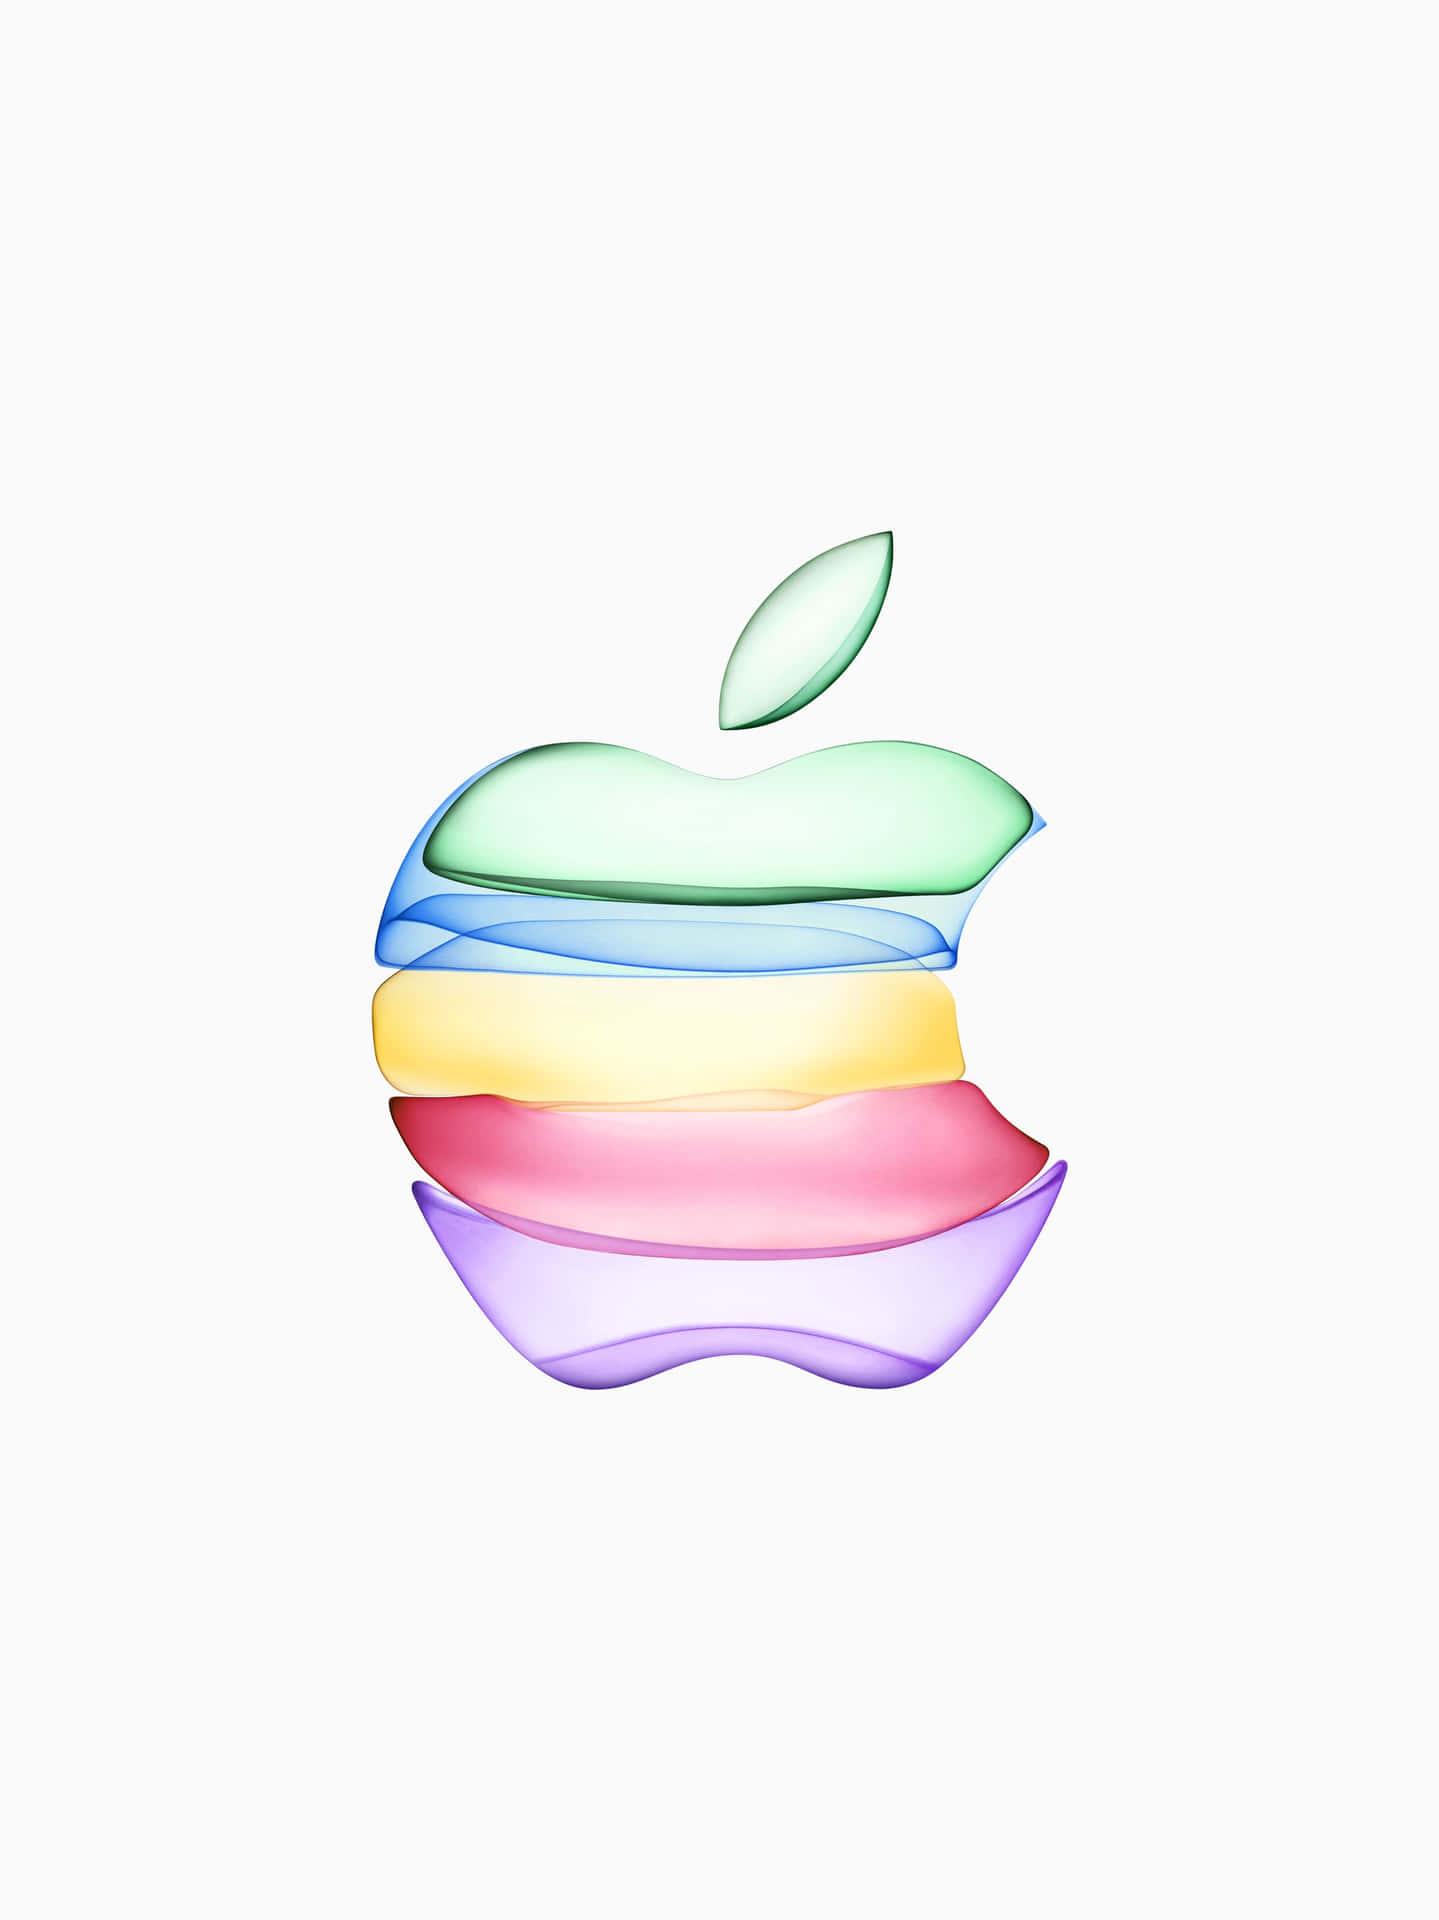 Apple Logo With Colorful Stripes Wallpaper